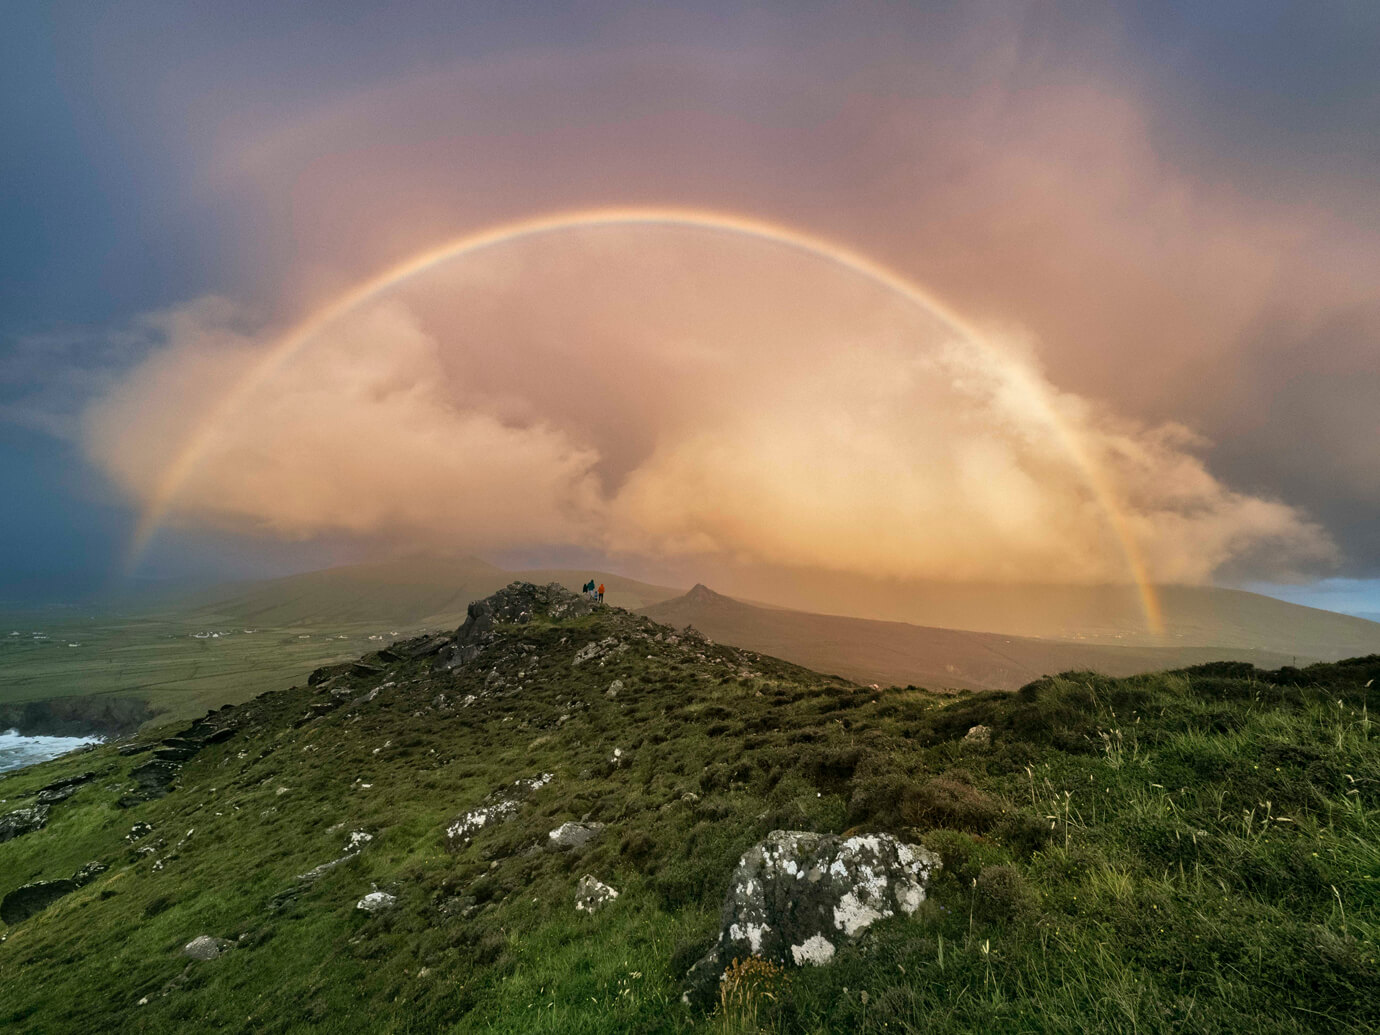 Ireland photography workshops with Melvin Nicholson and Rodney O'Callaghan